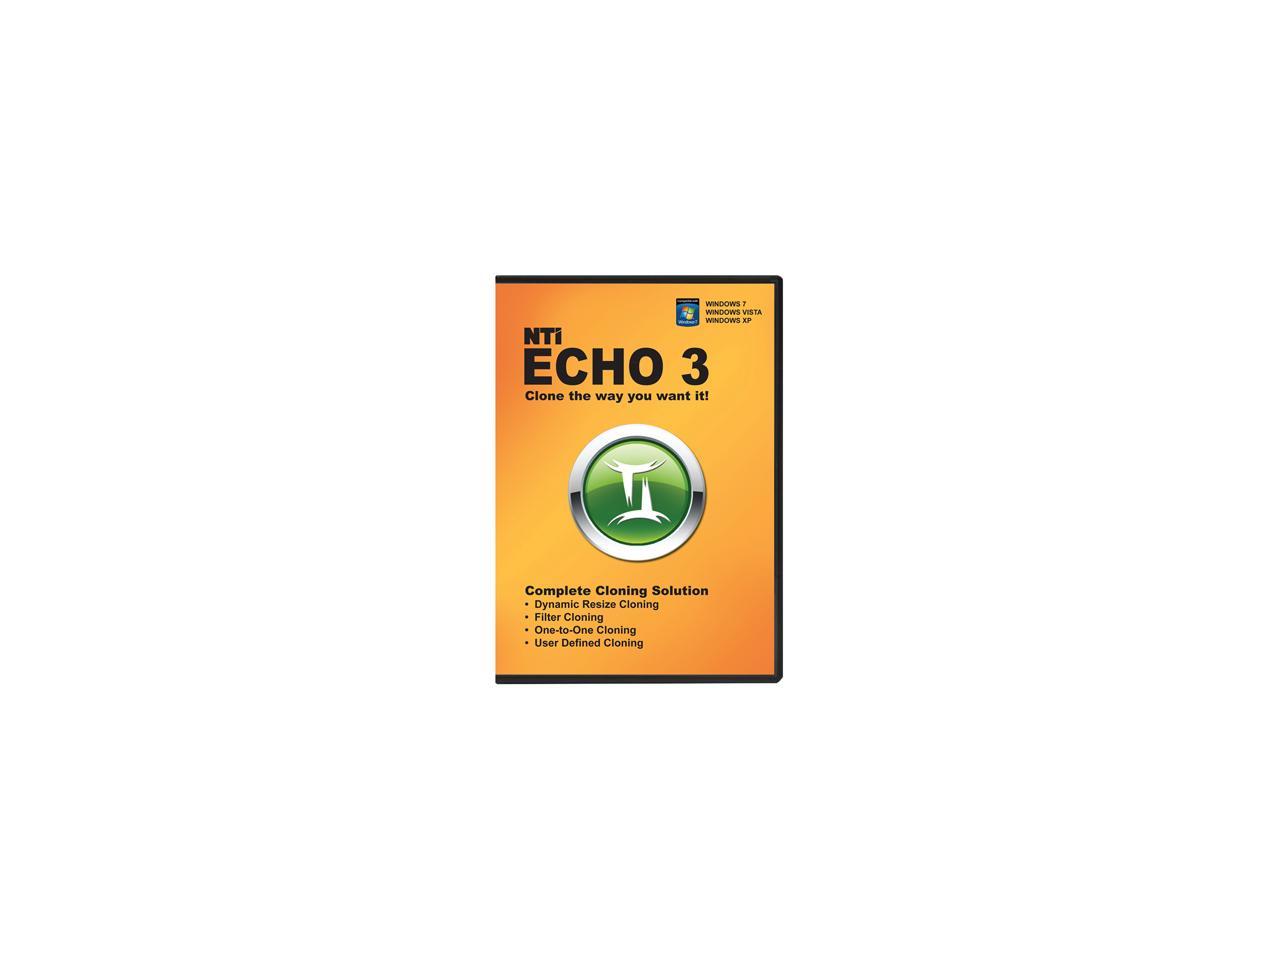 board Tap Toxic NTi Echo 3 - Perfect solution for all your cloning needs - Newegg.com